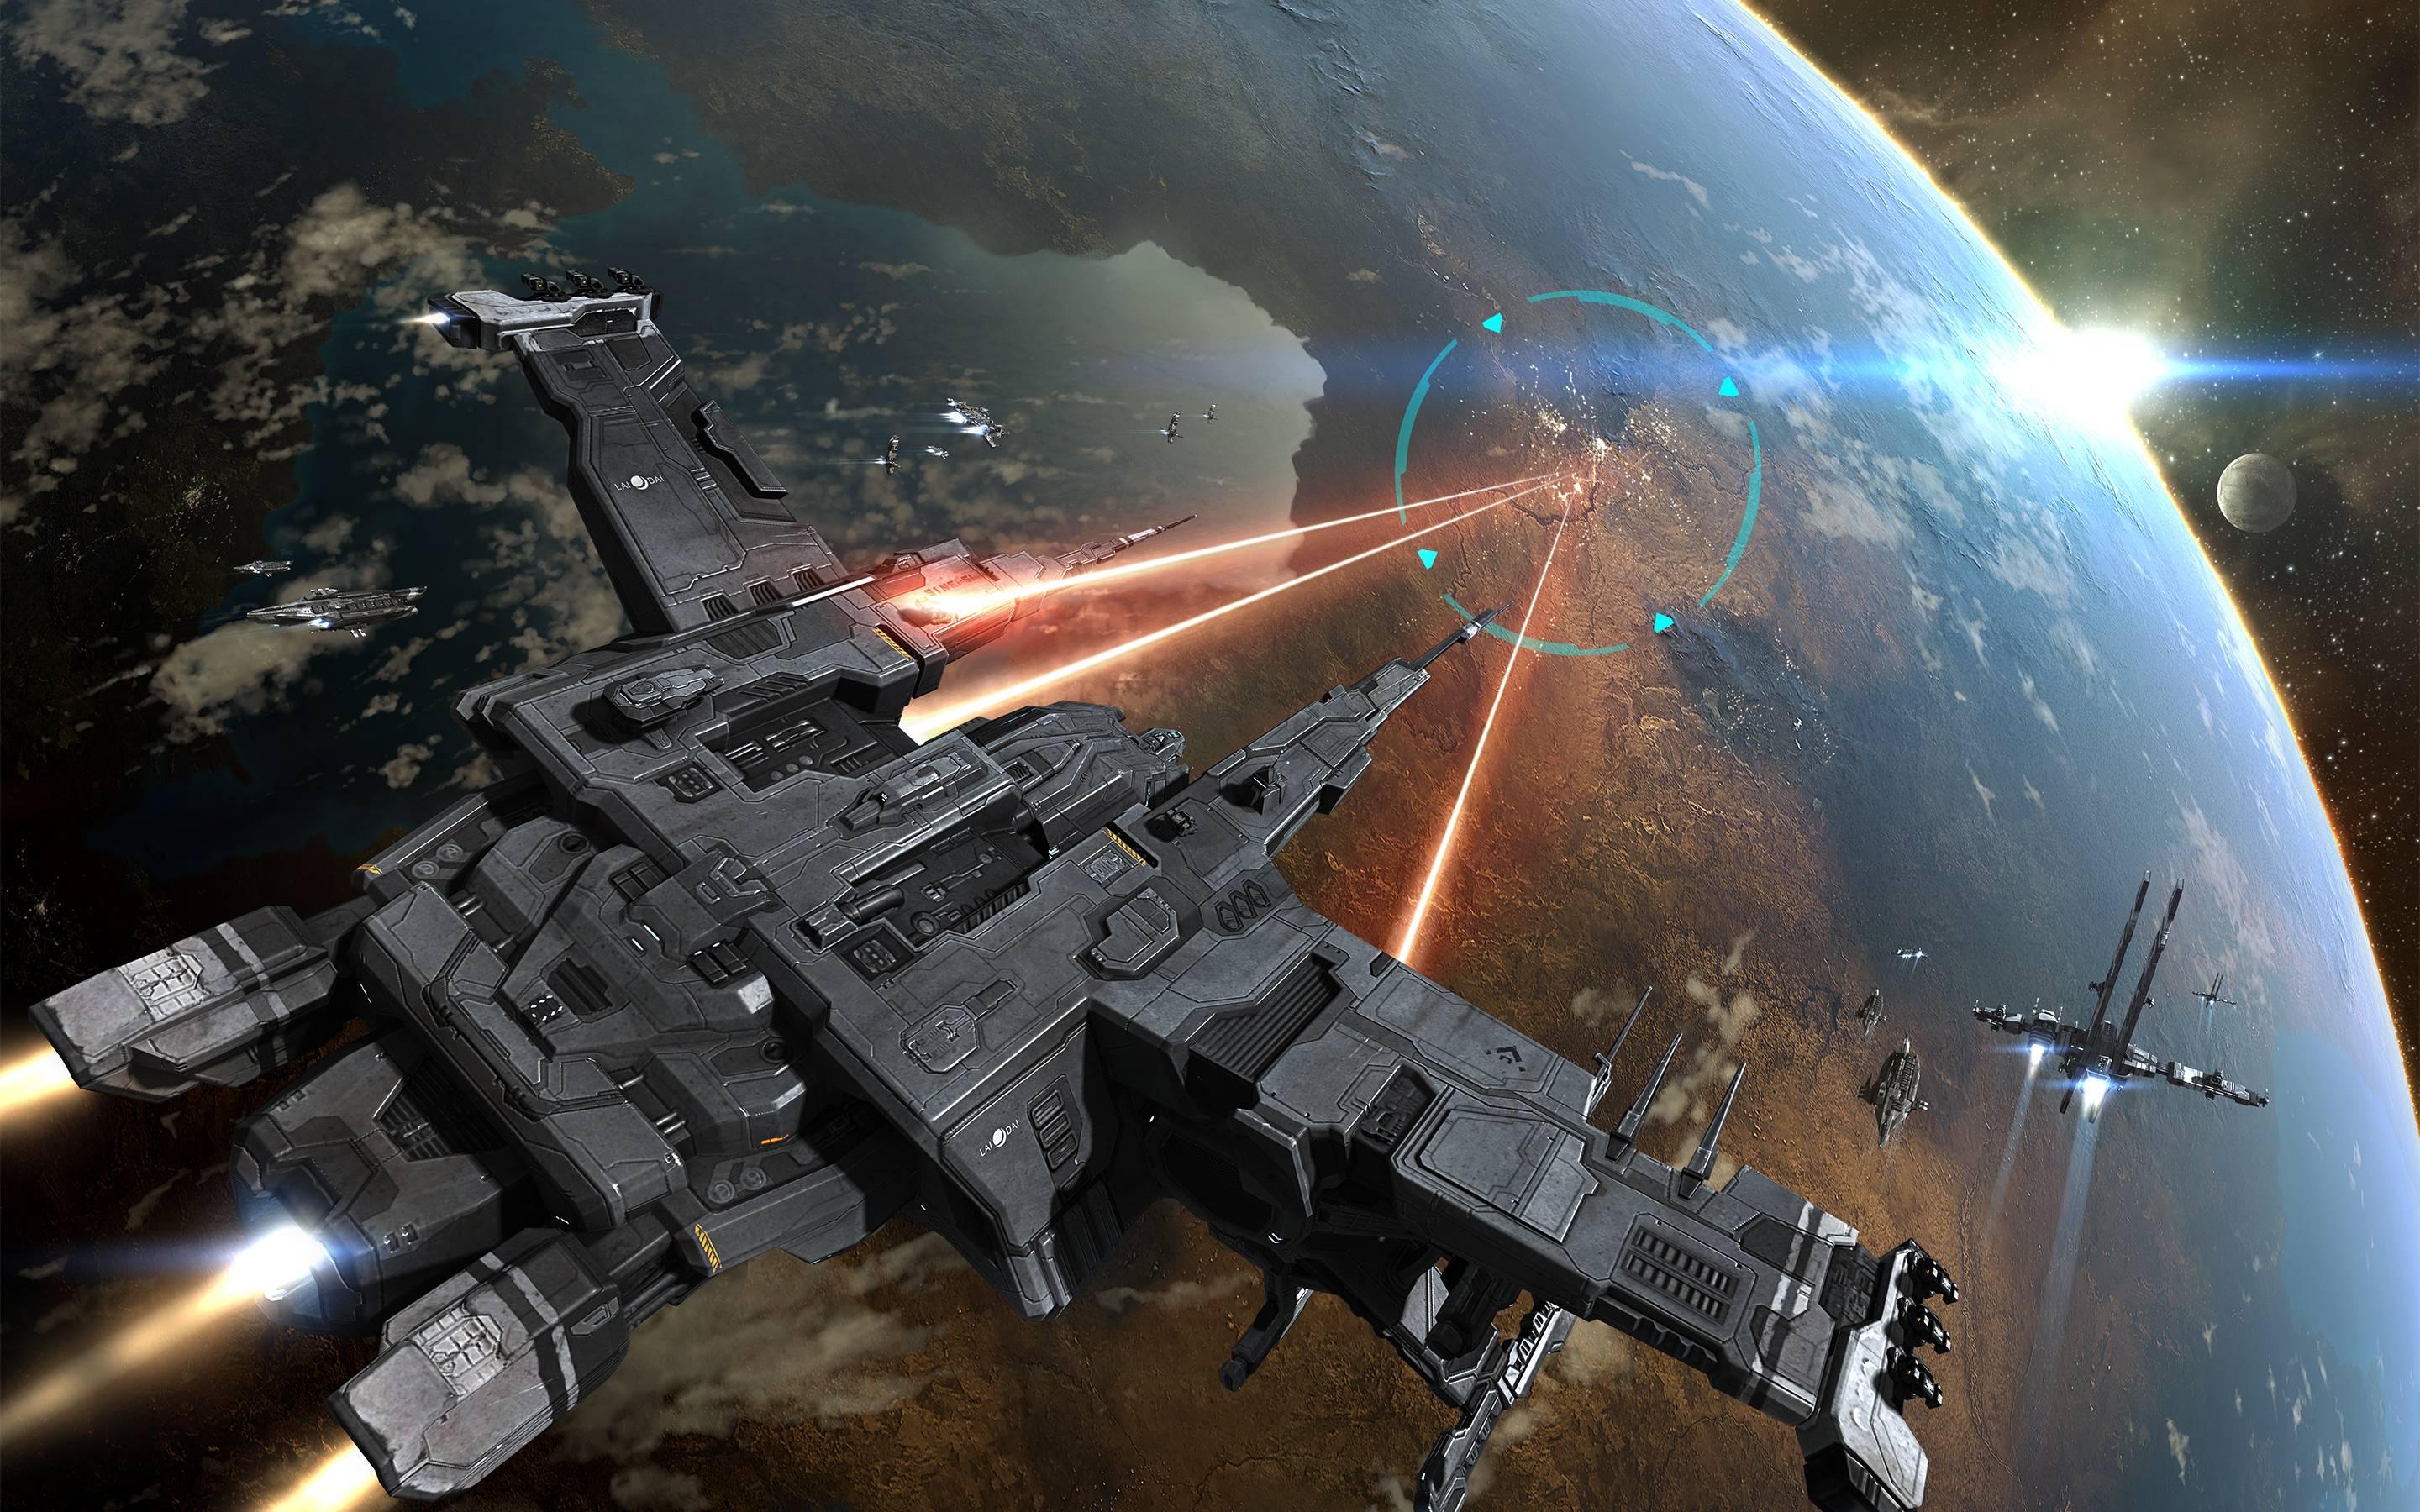 Eve Online Screen 2880×1800 Definition Wallpaper. Daily